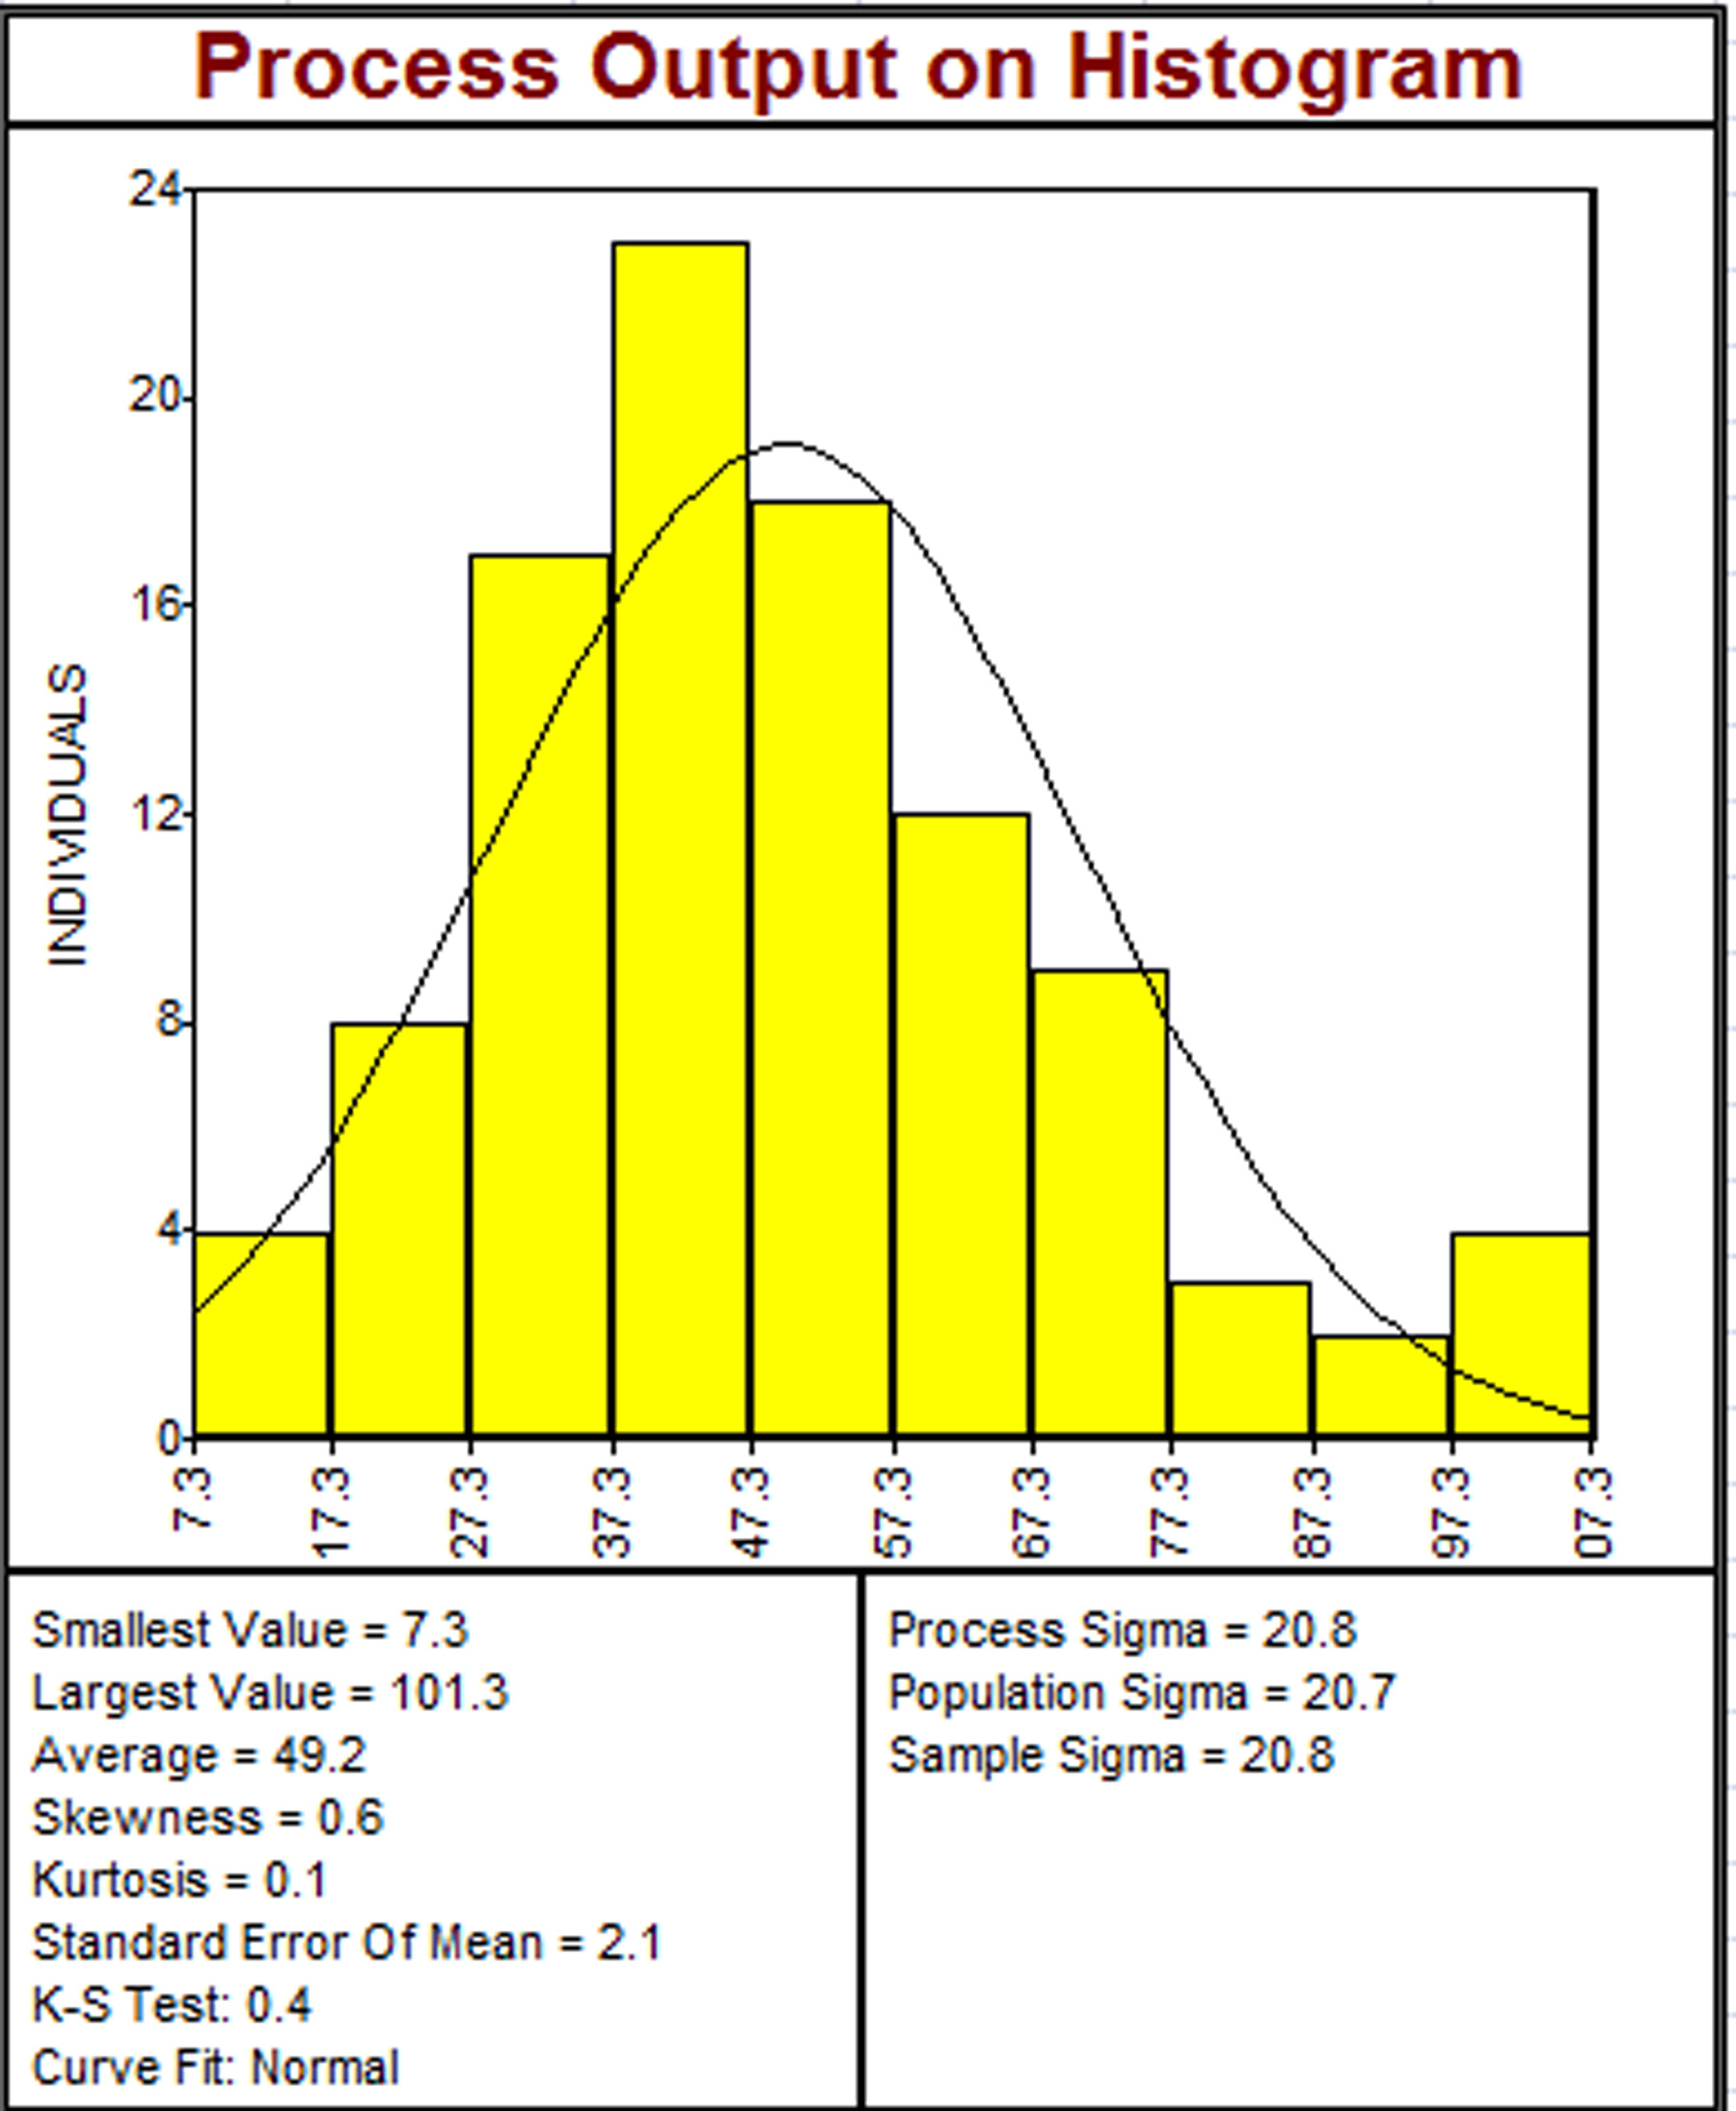 Histogram with the intent to show a stable and capable process.